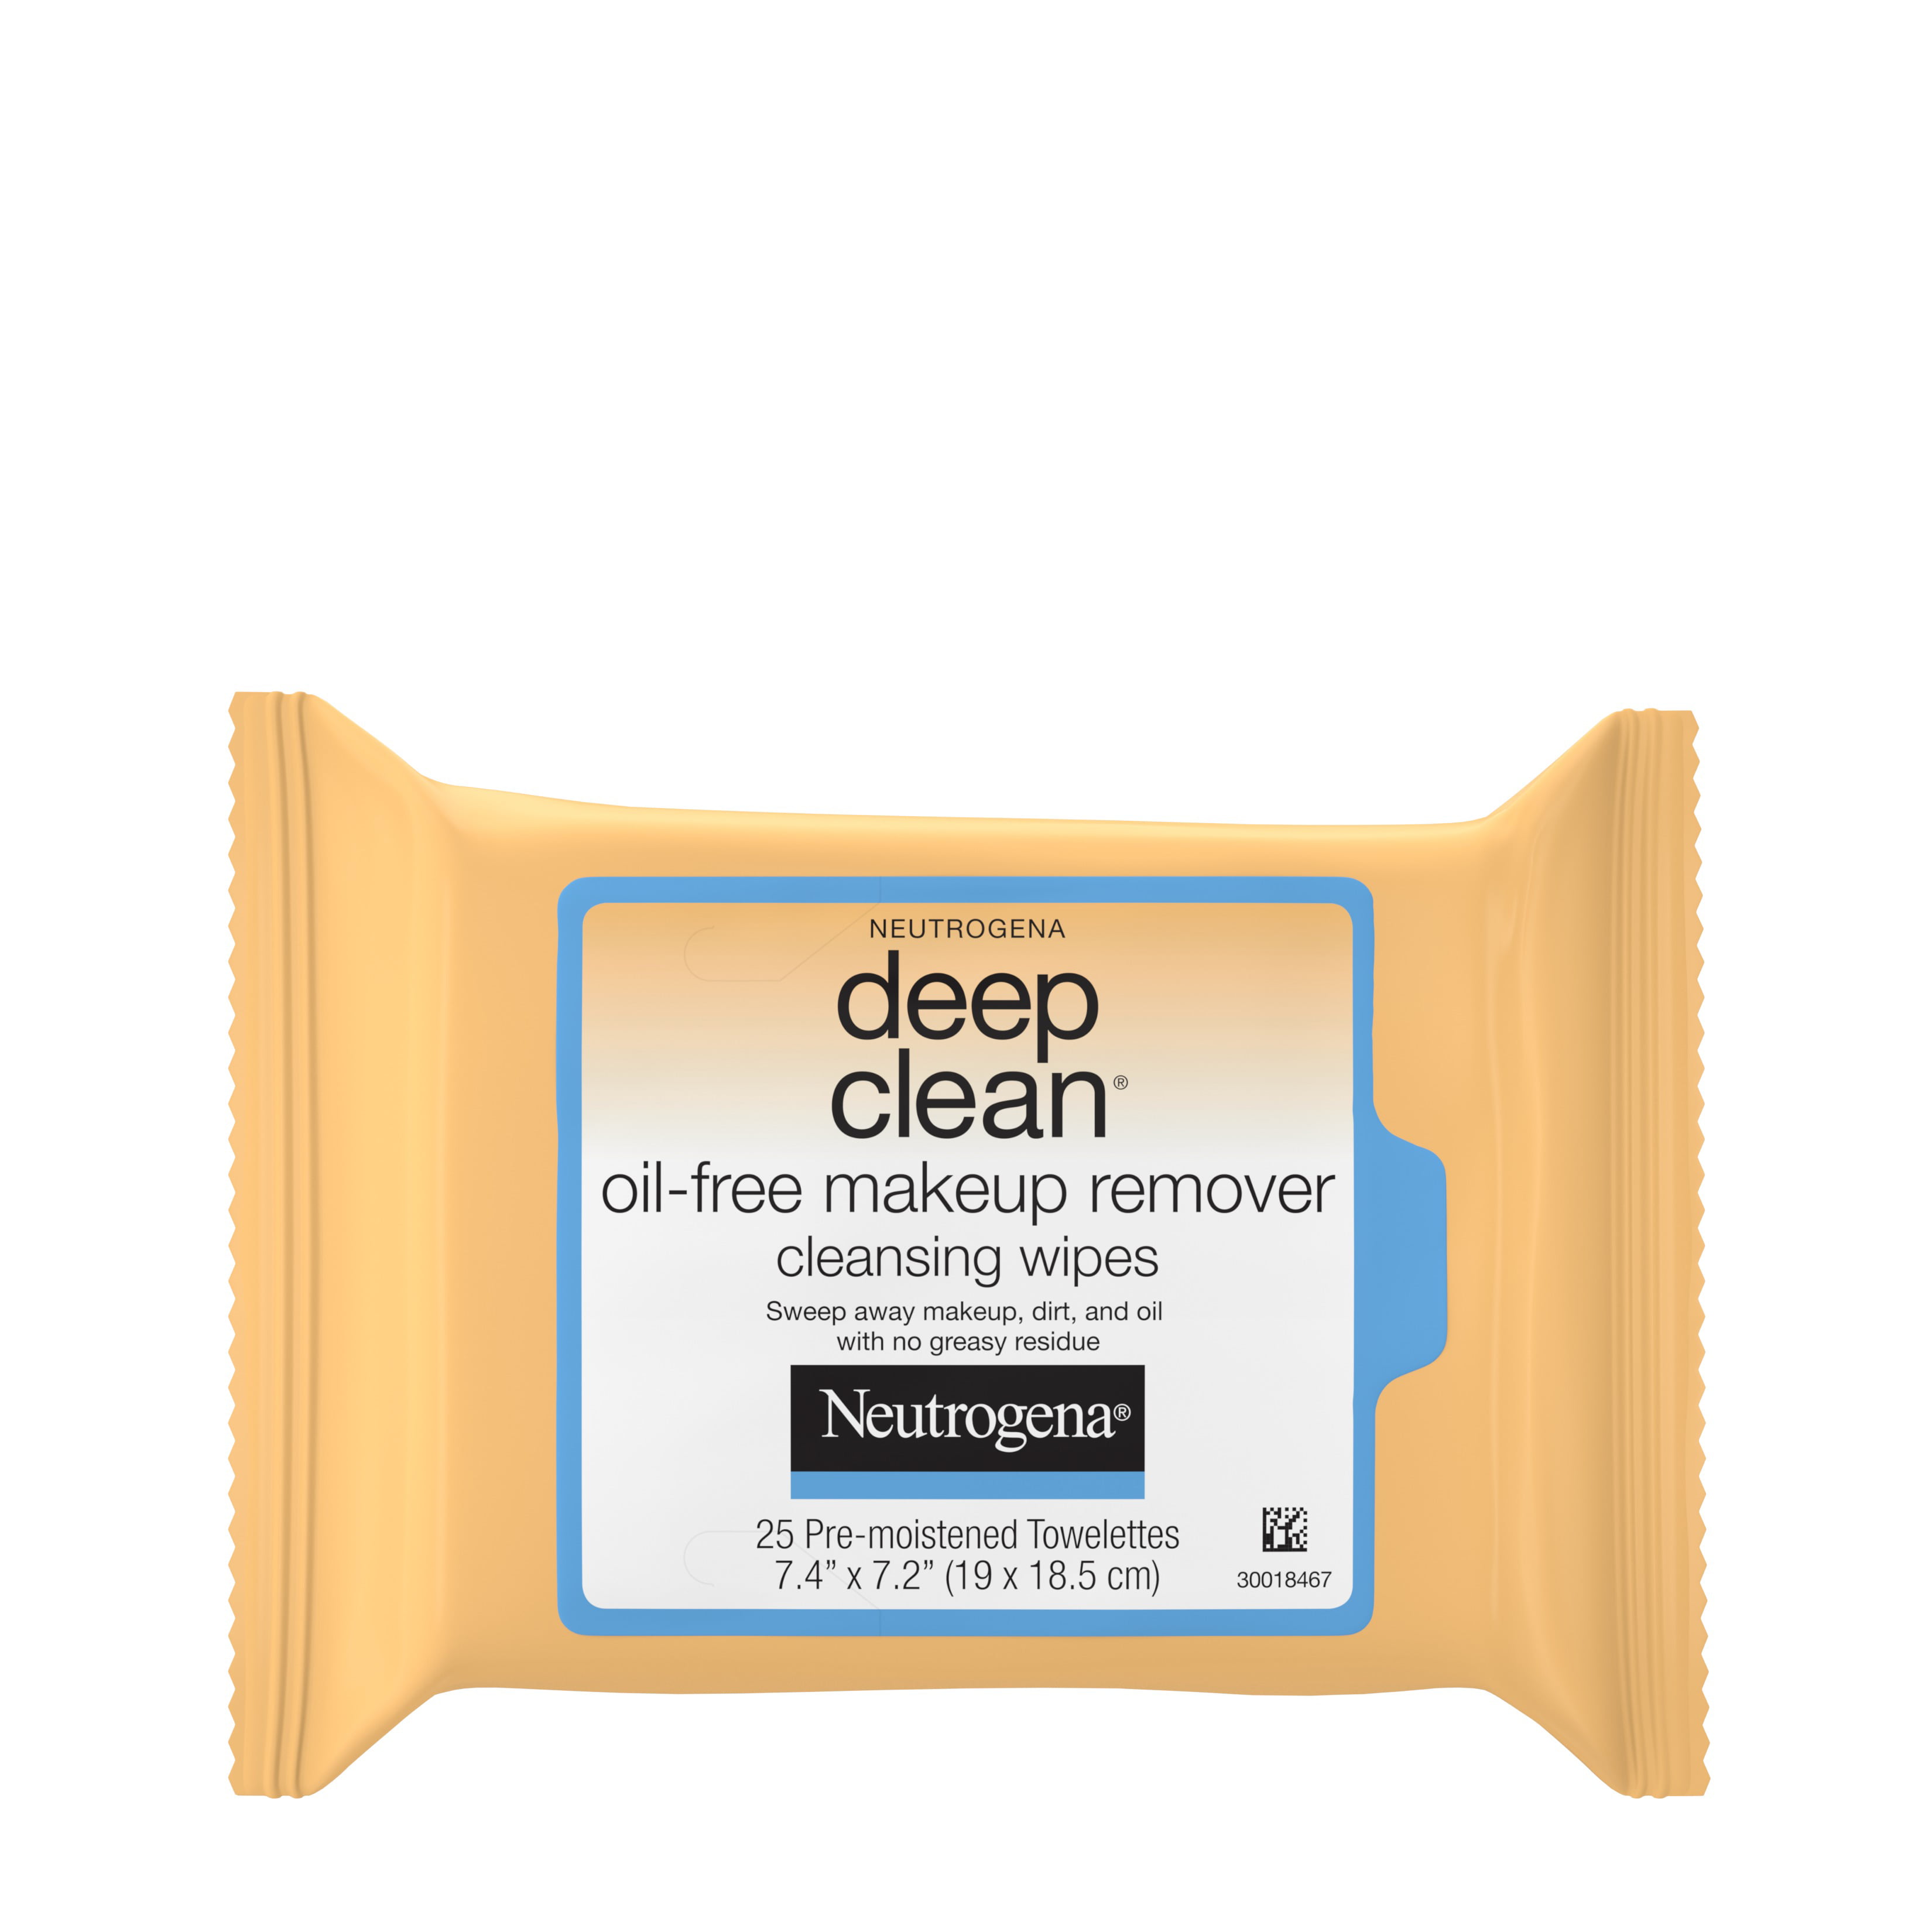 25 Count Single Pack Neutrogena Deep Clean Makeup Remover Face Wipes 